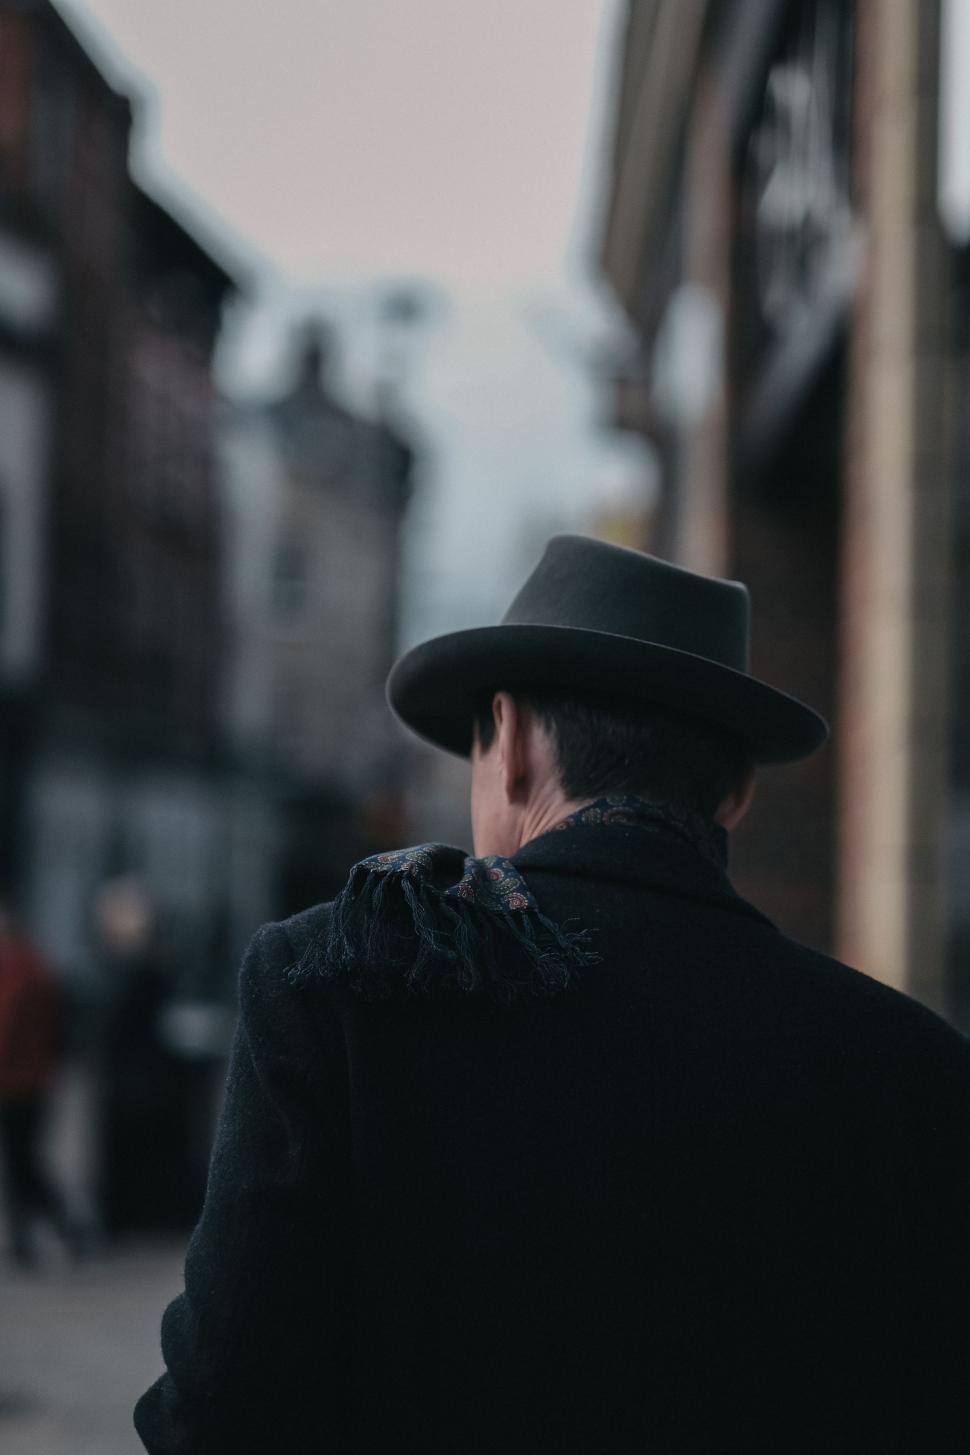 Free Image of Man in Hat and Coat Walking Down Street 